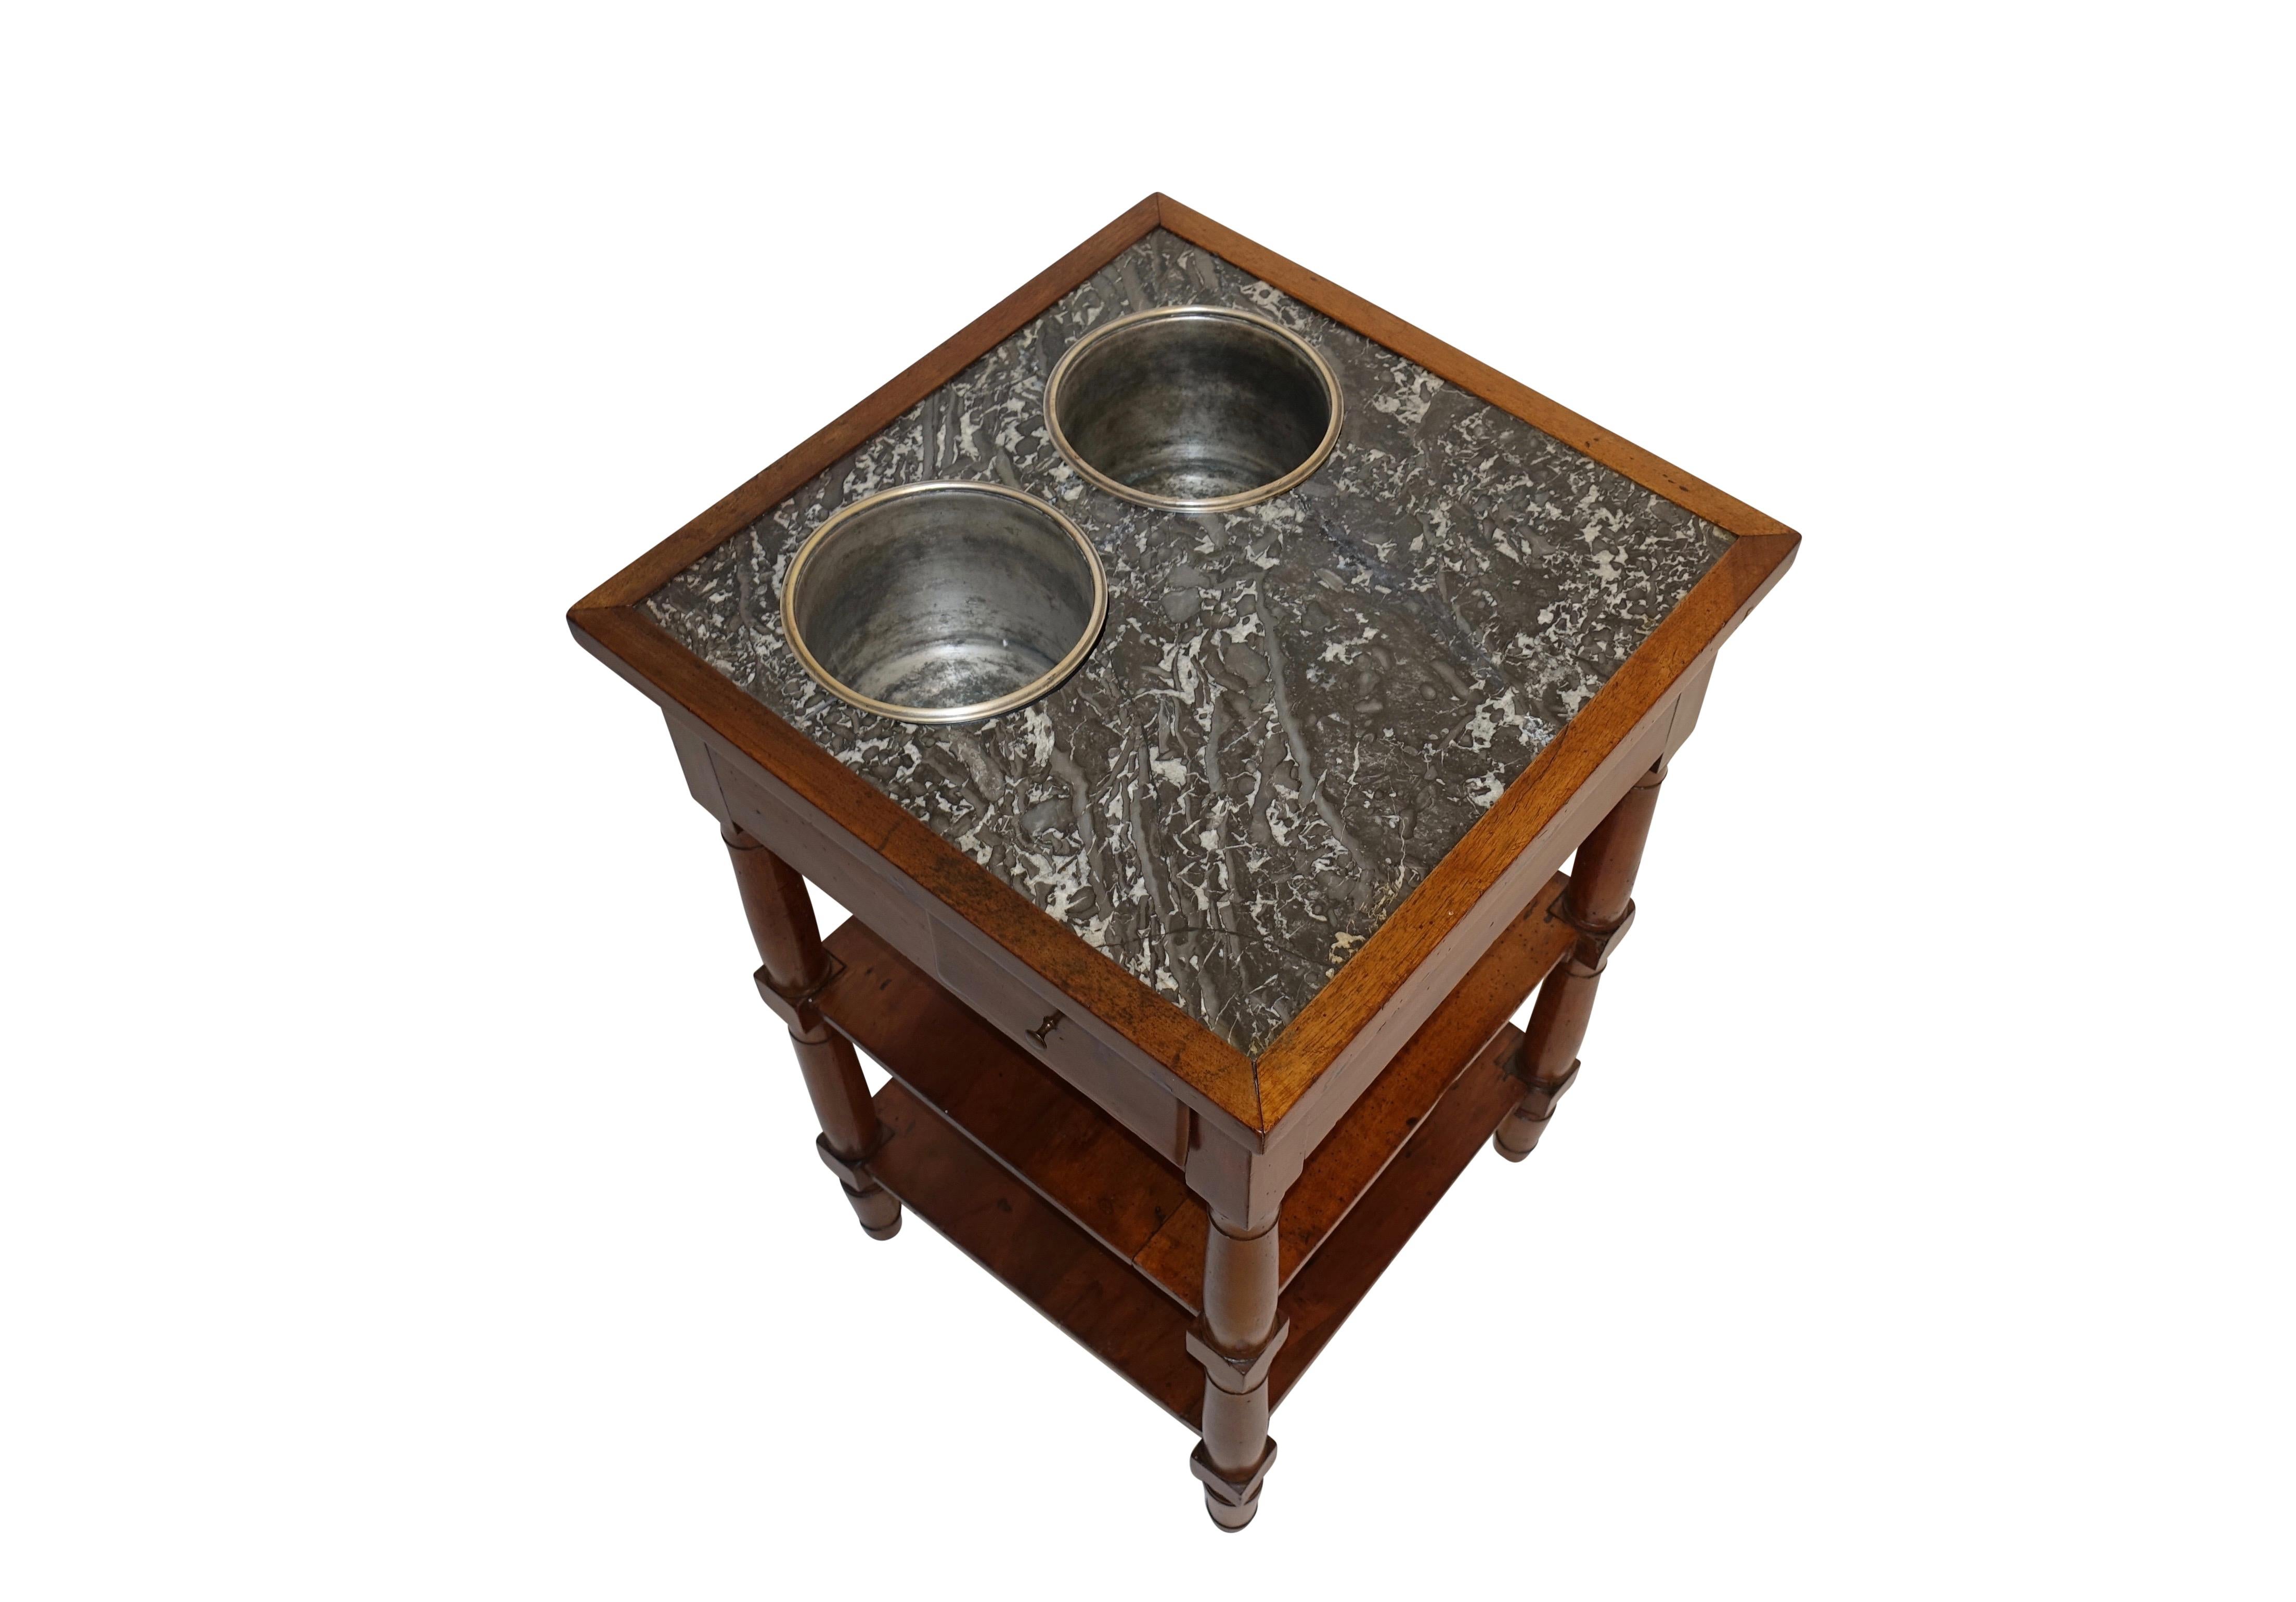 Marble Walnut Rafraishissoire Table with Silver Plated Wine Holders, French, circa 1780